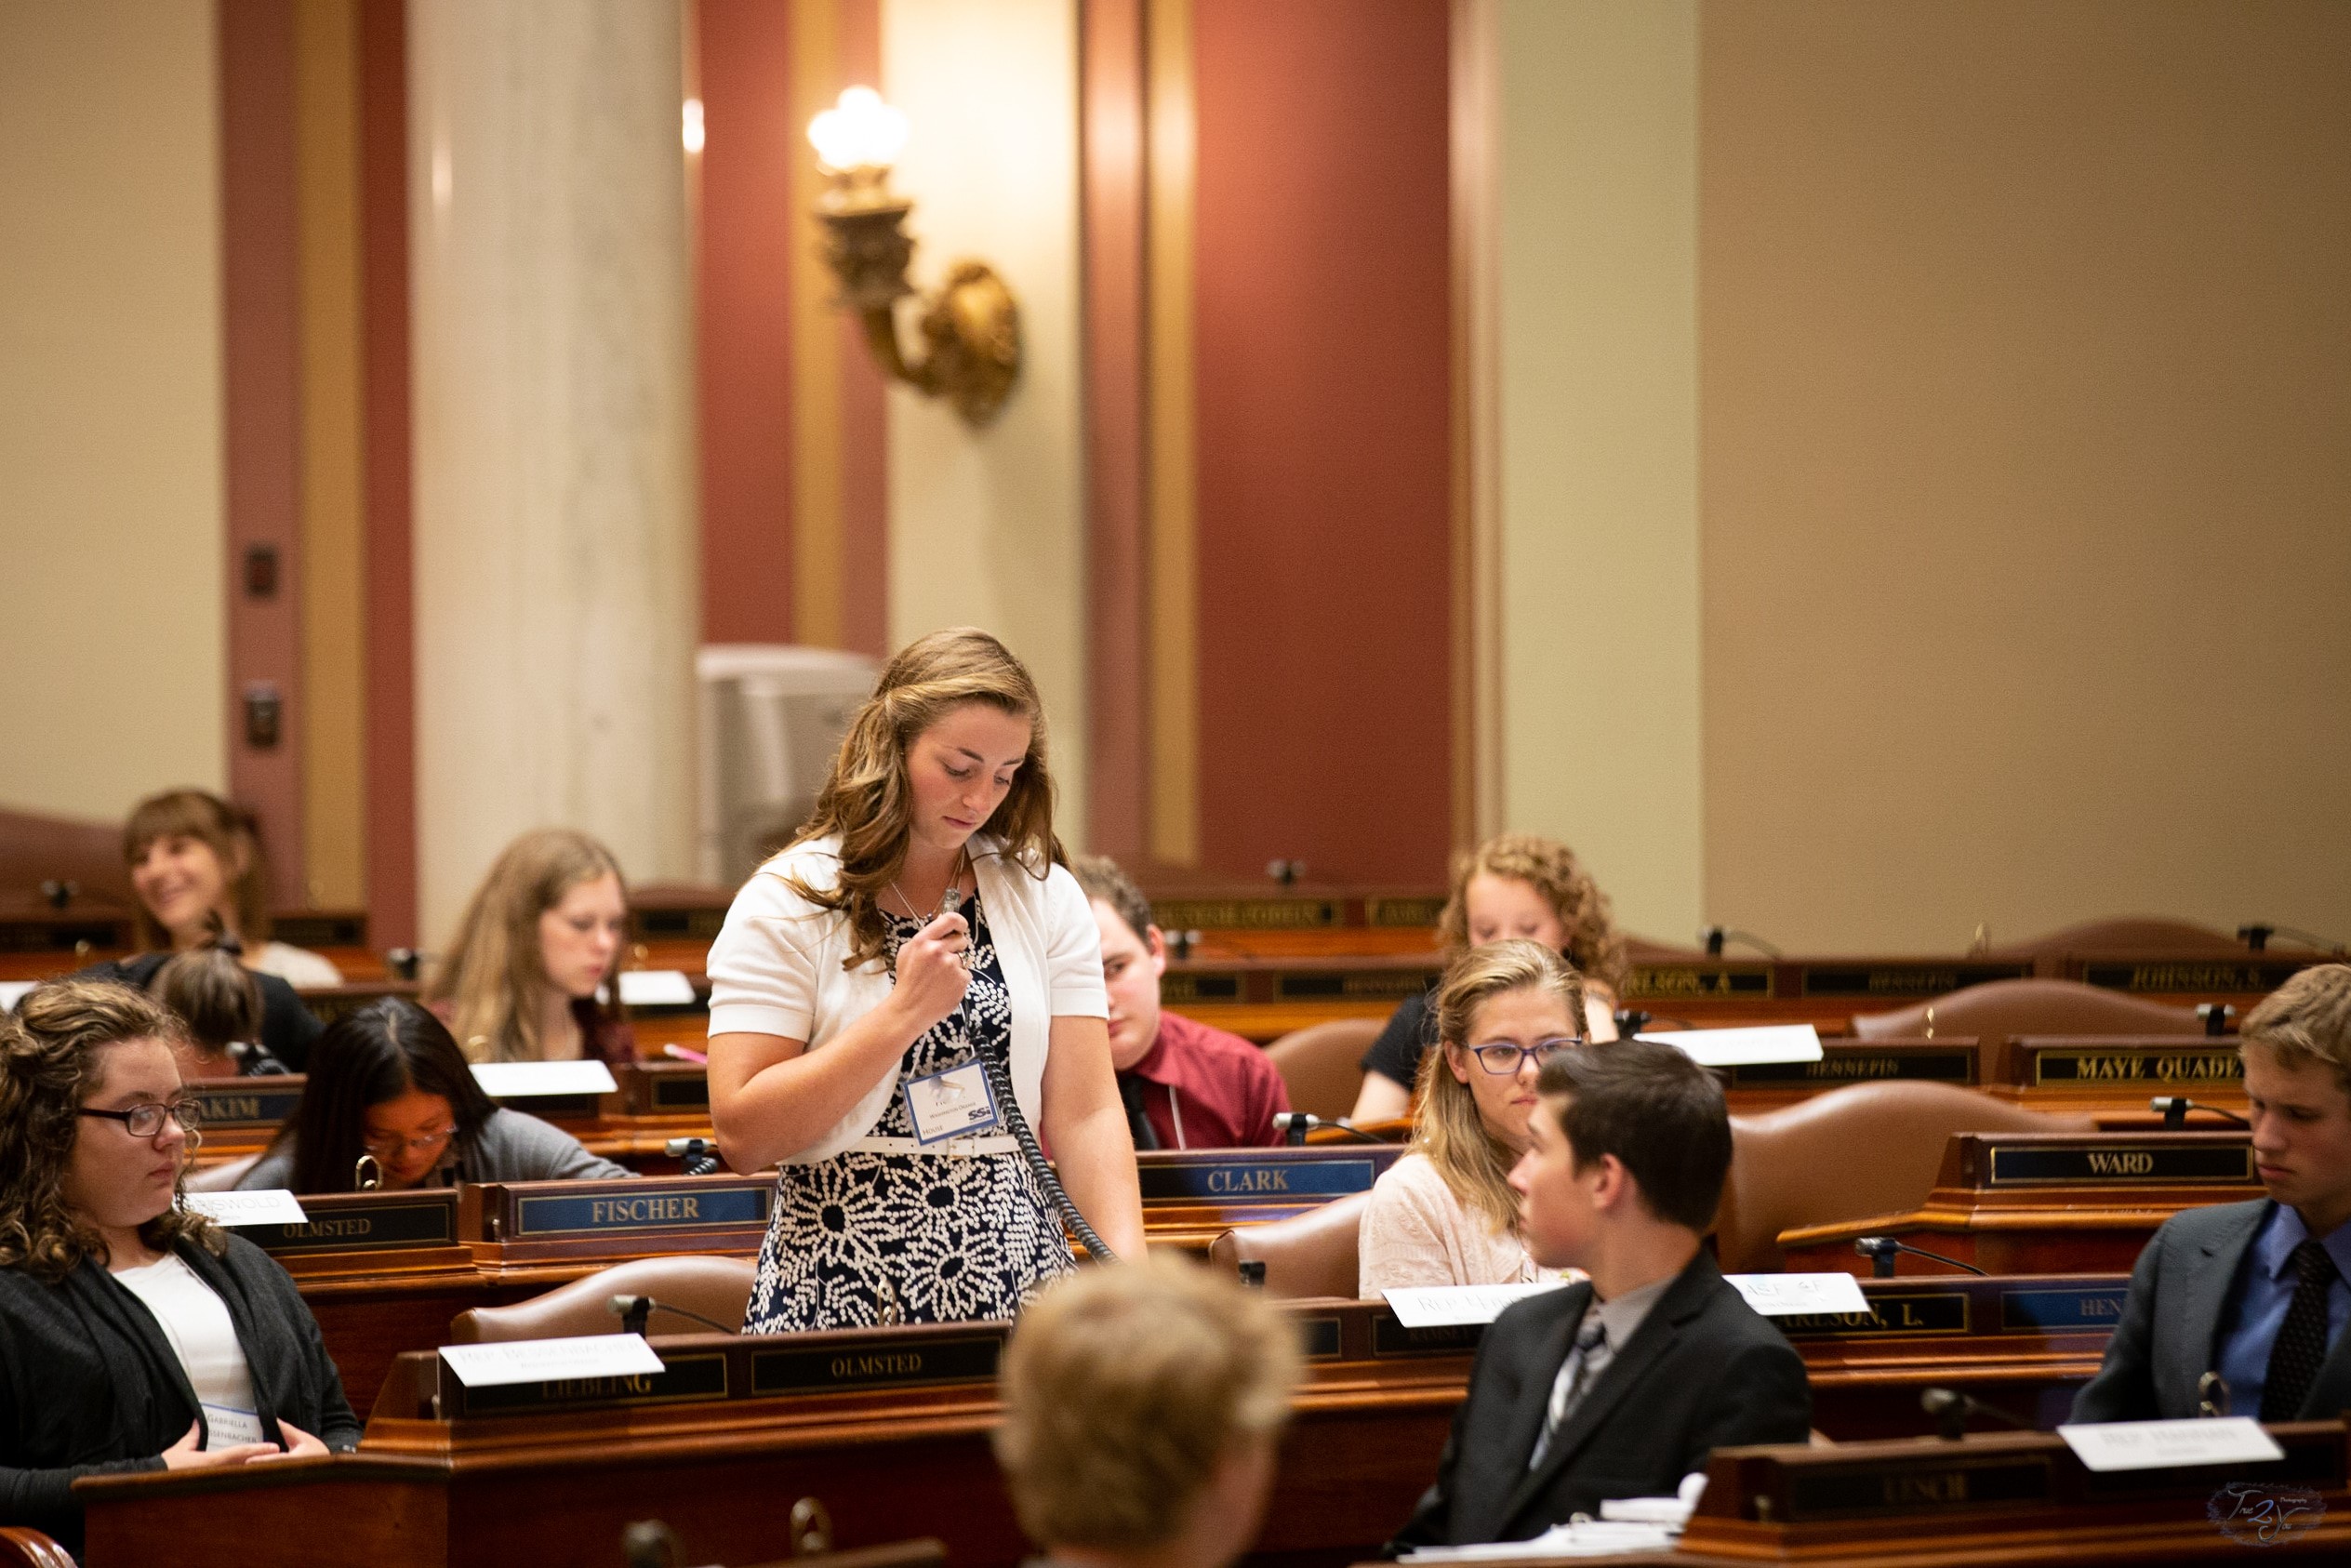 Student putting her leadership training into action at the Minnesota State Capitol